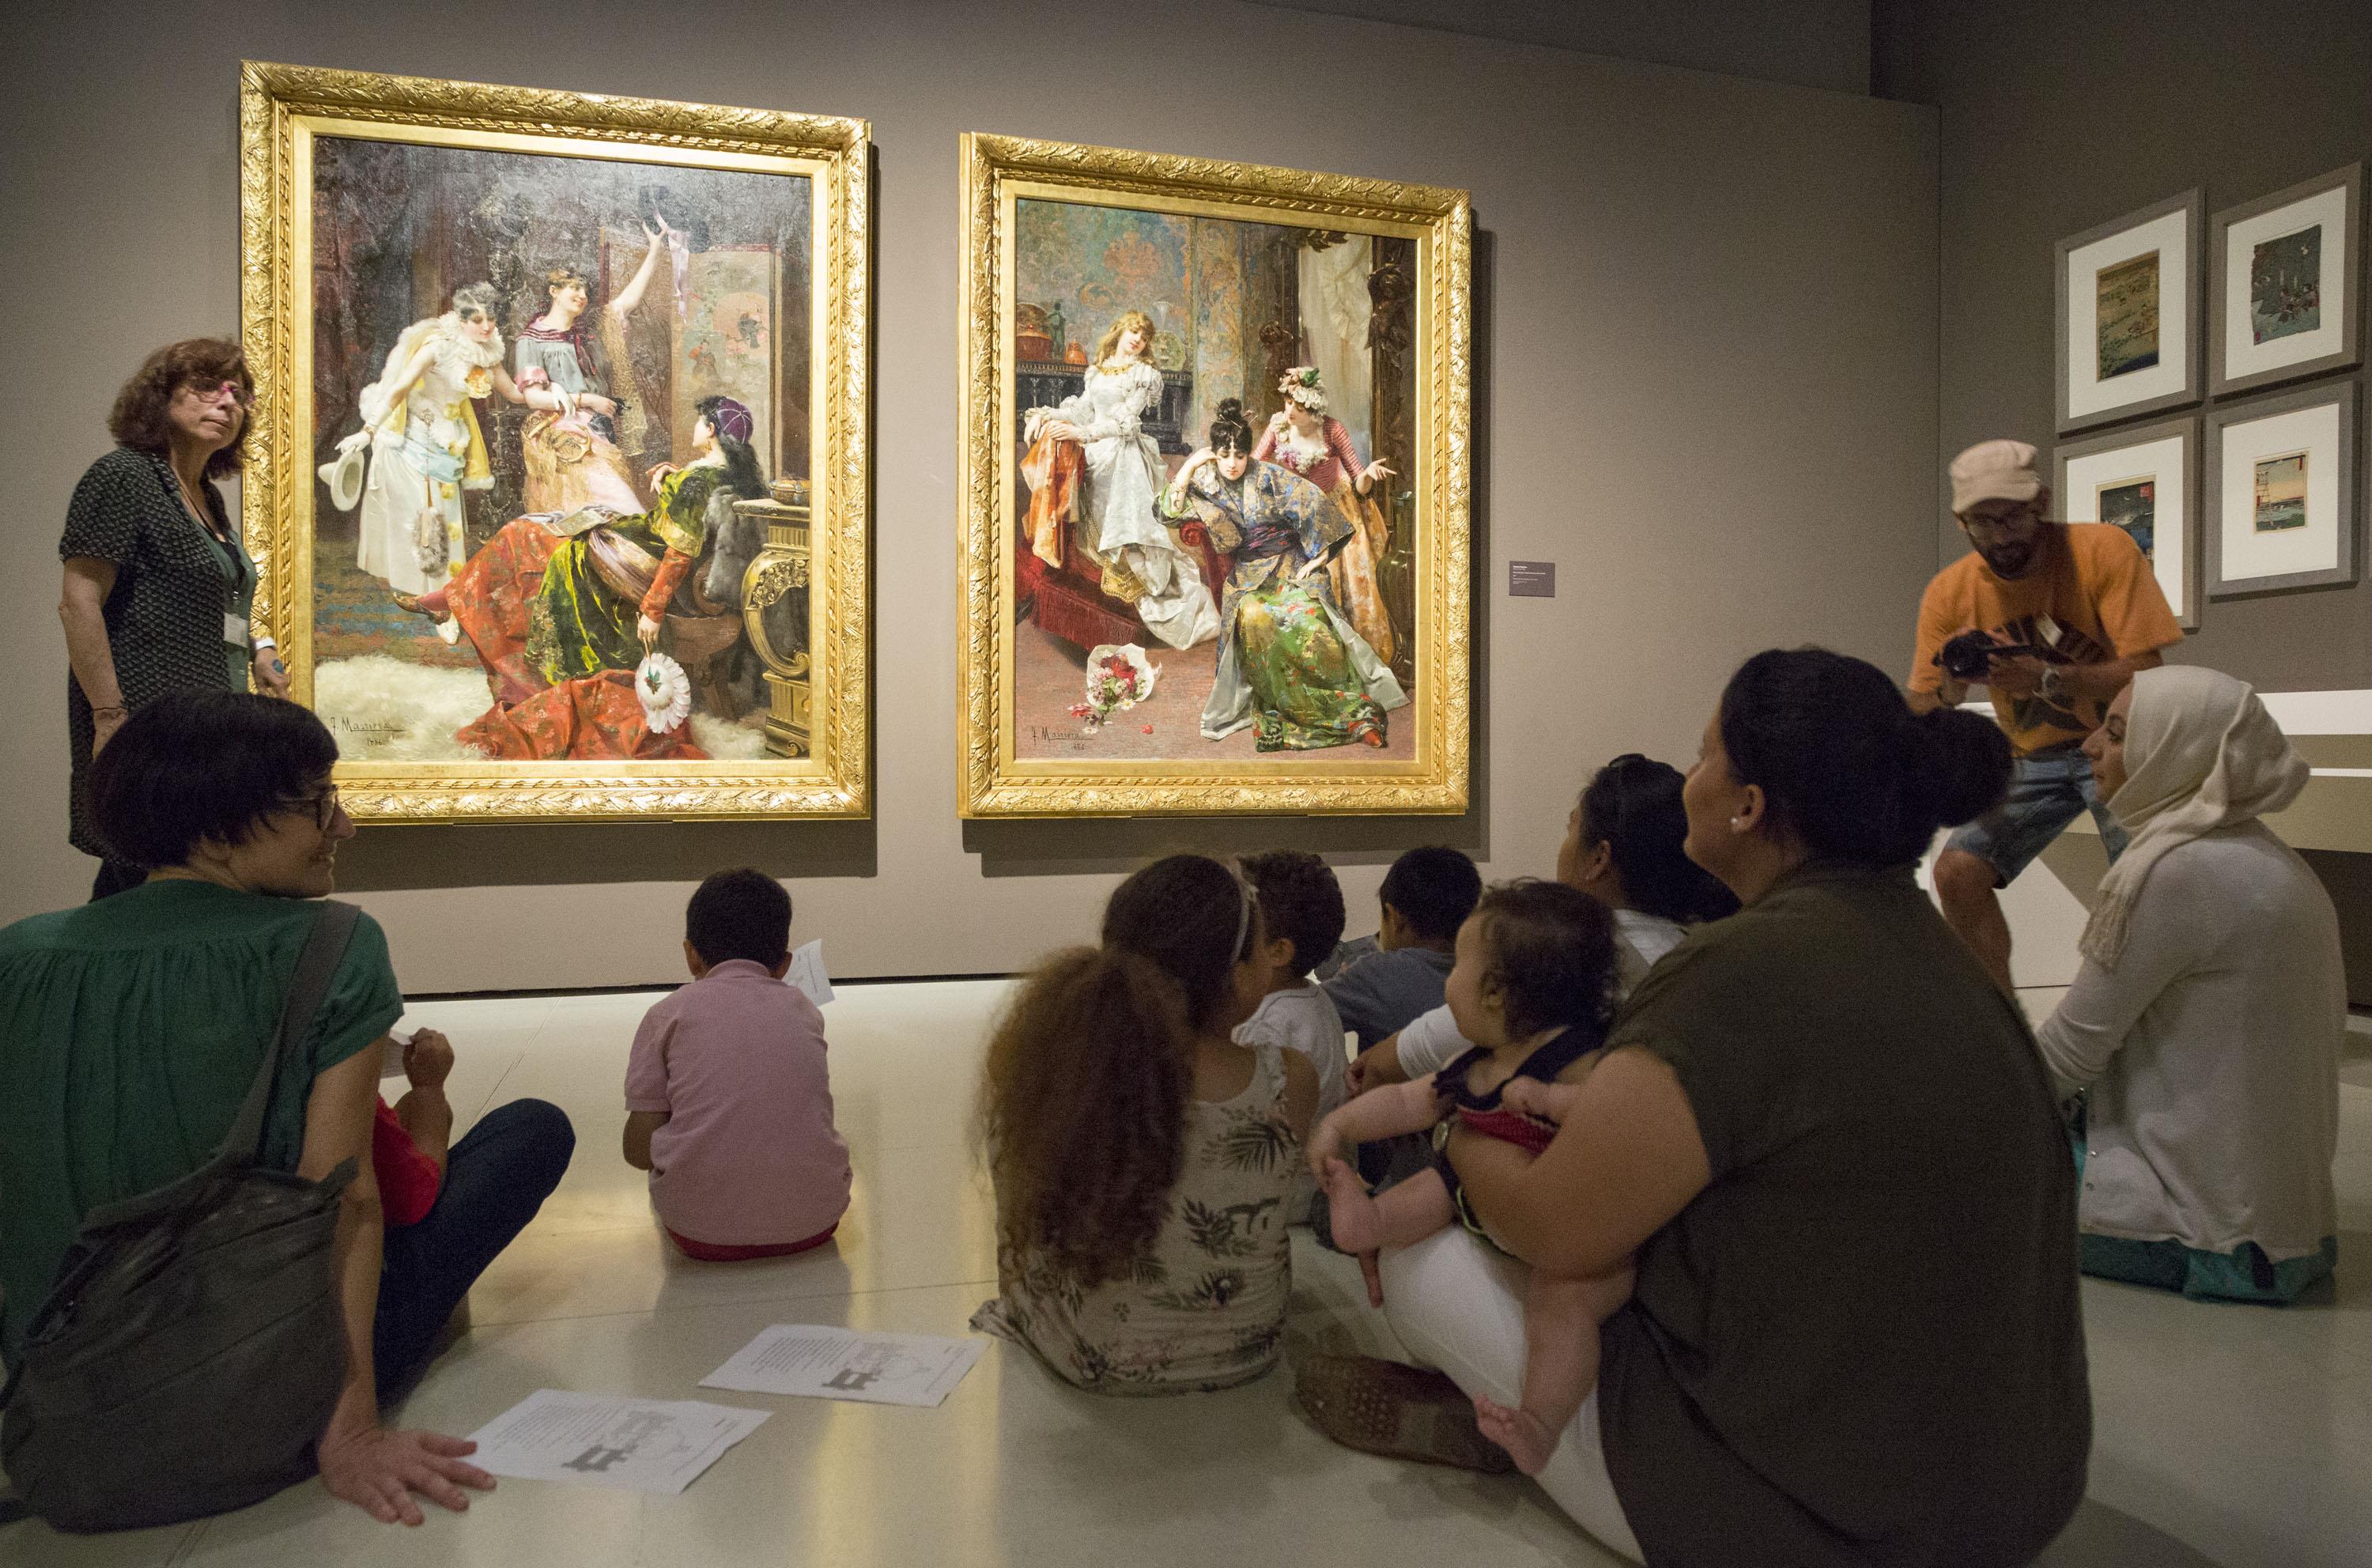 Activities for different publics in the Museu Nacional